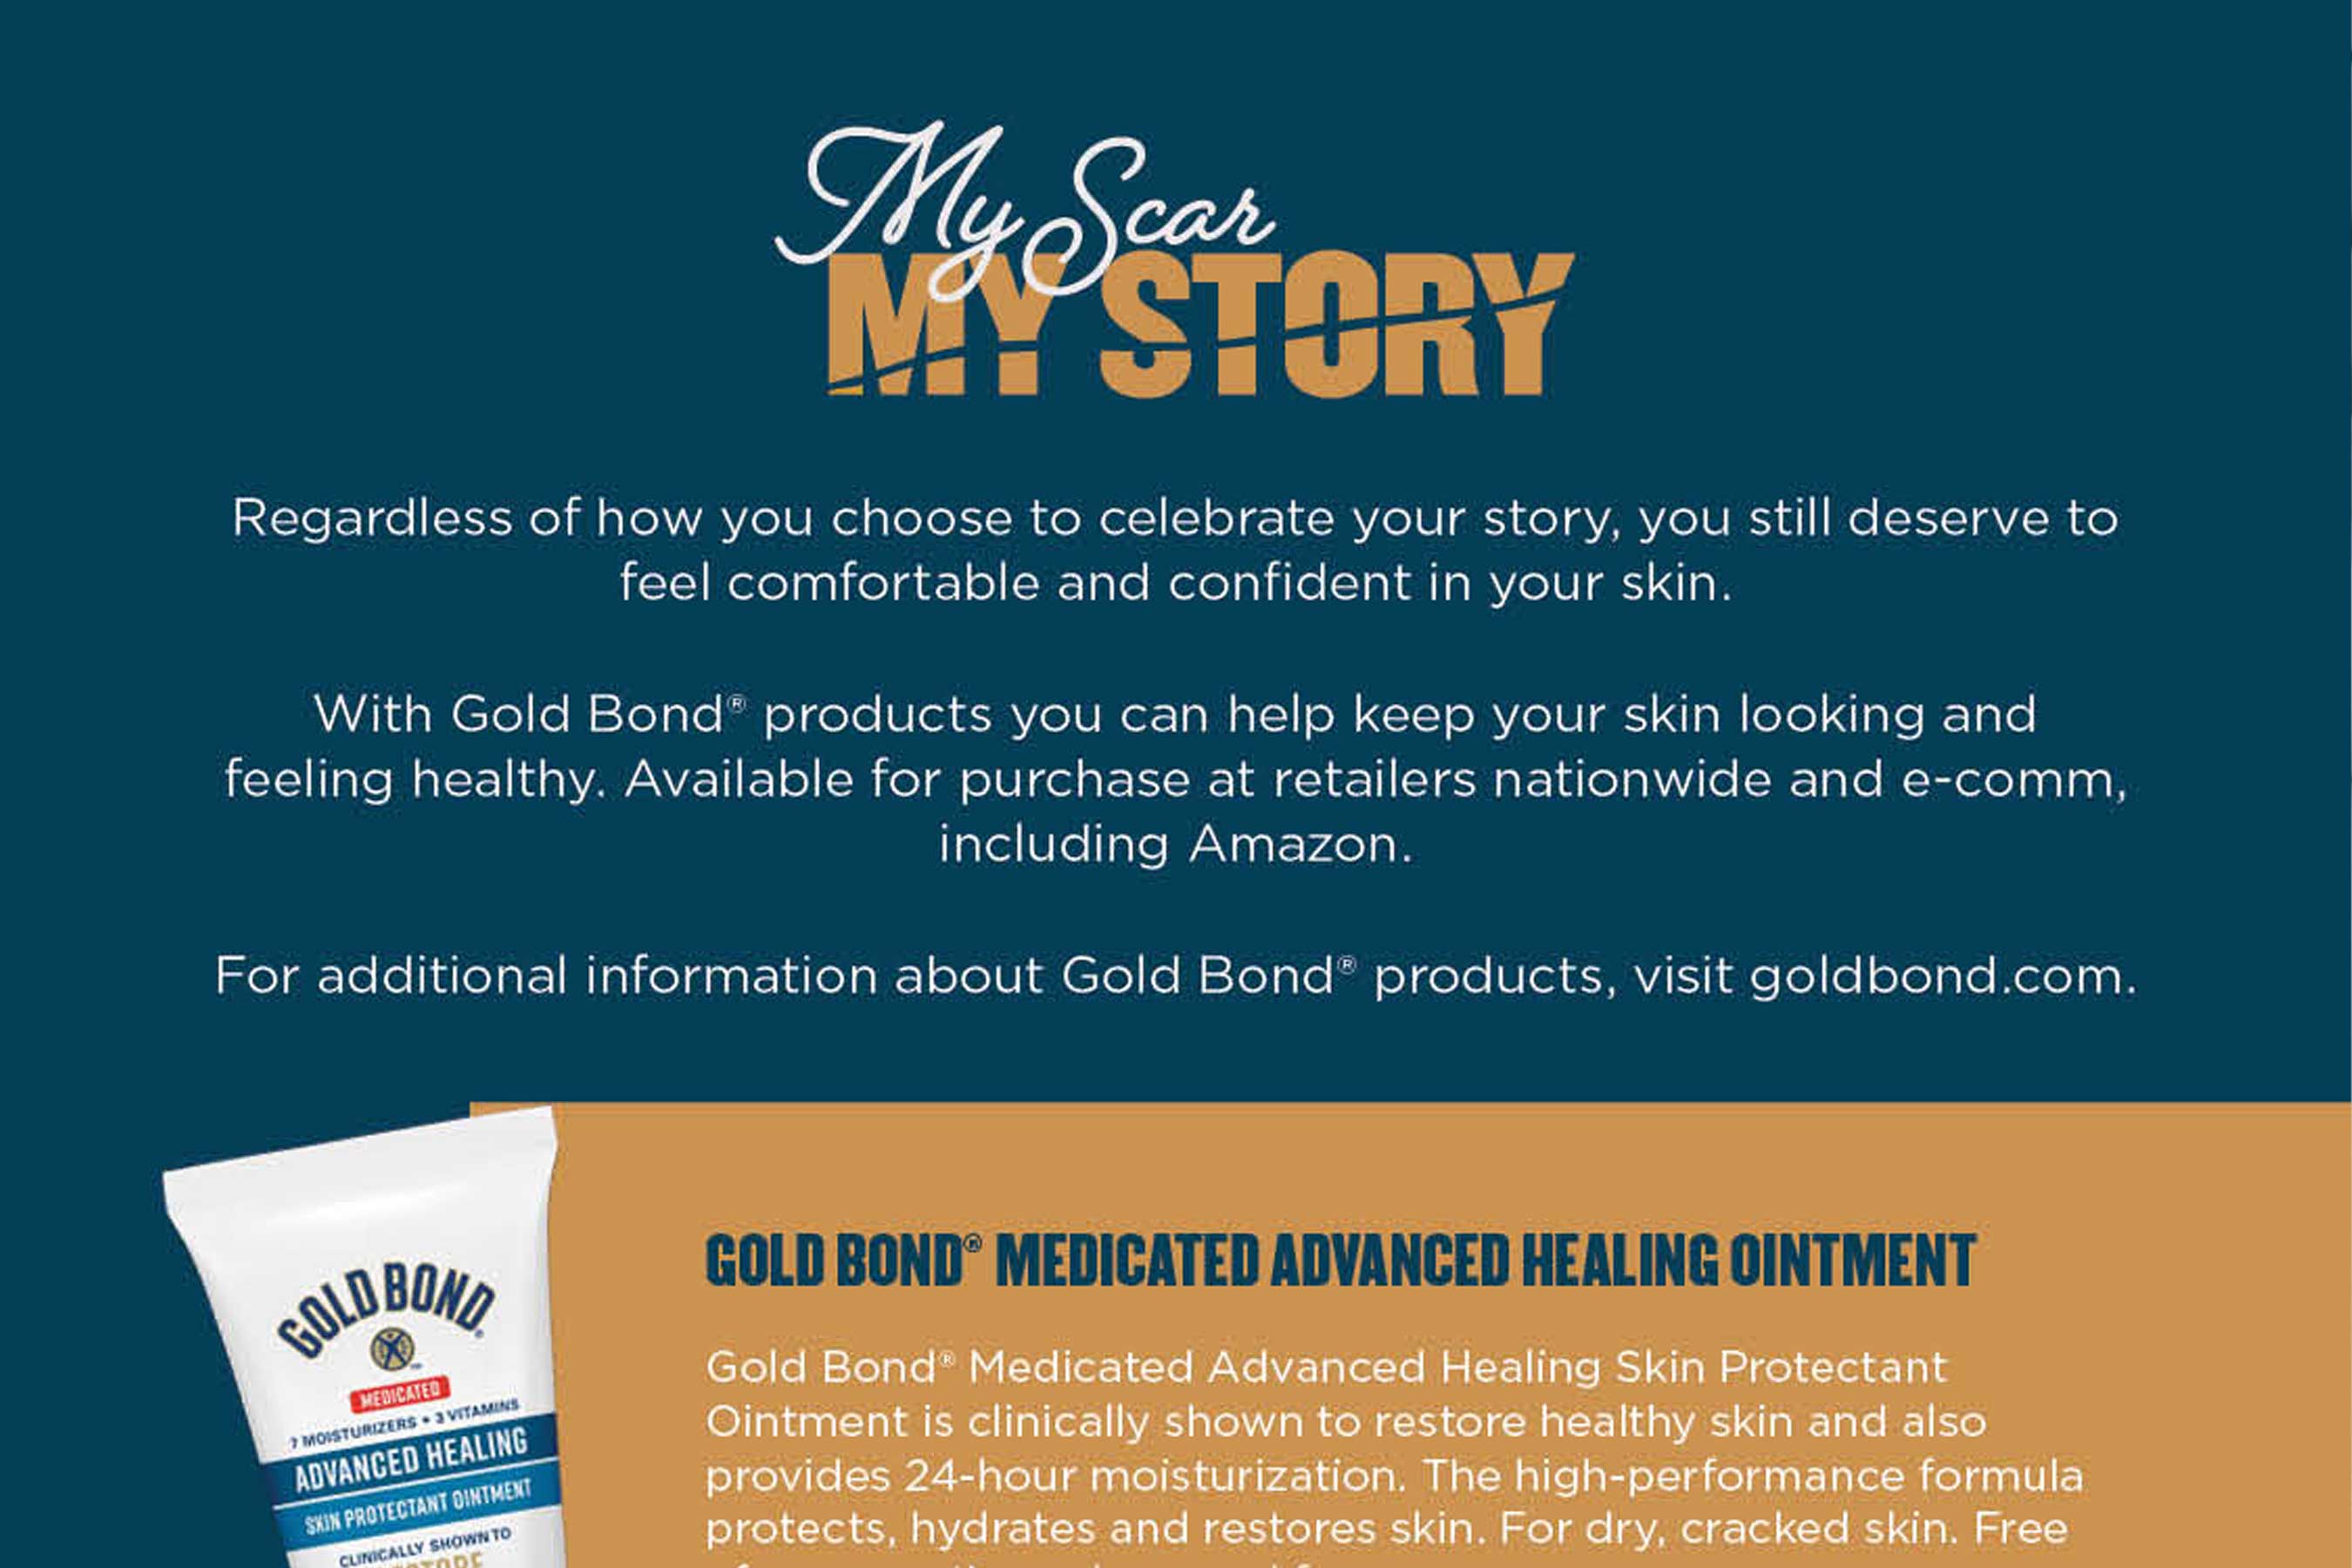 “My Scar My Story” Product Factsheet